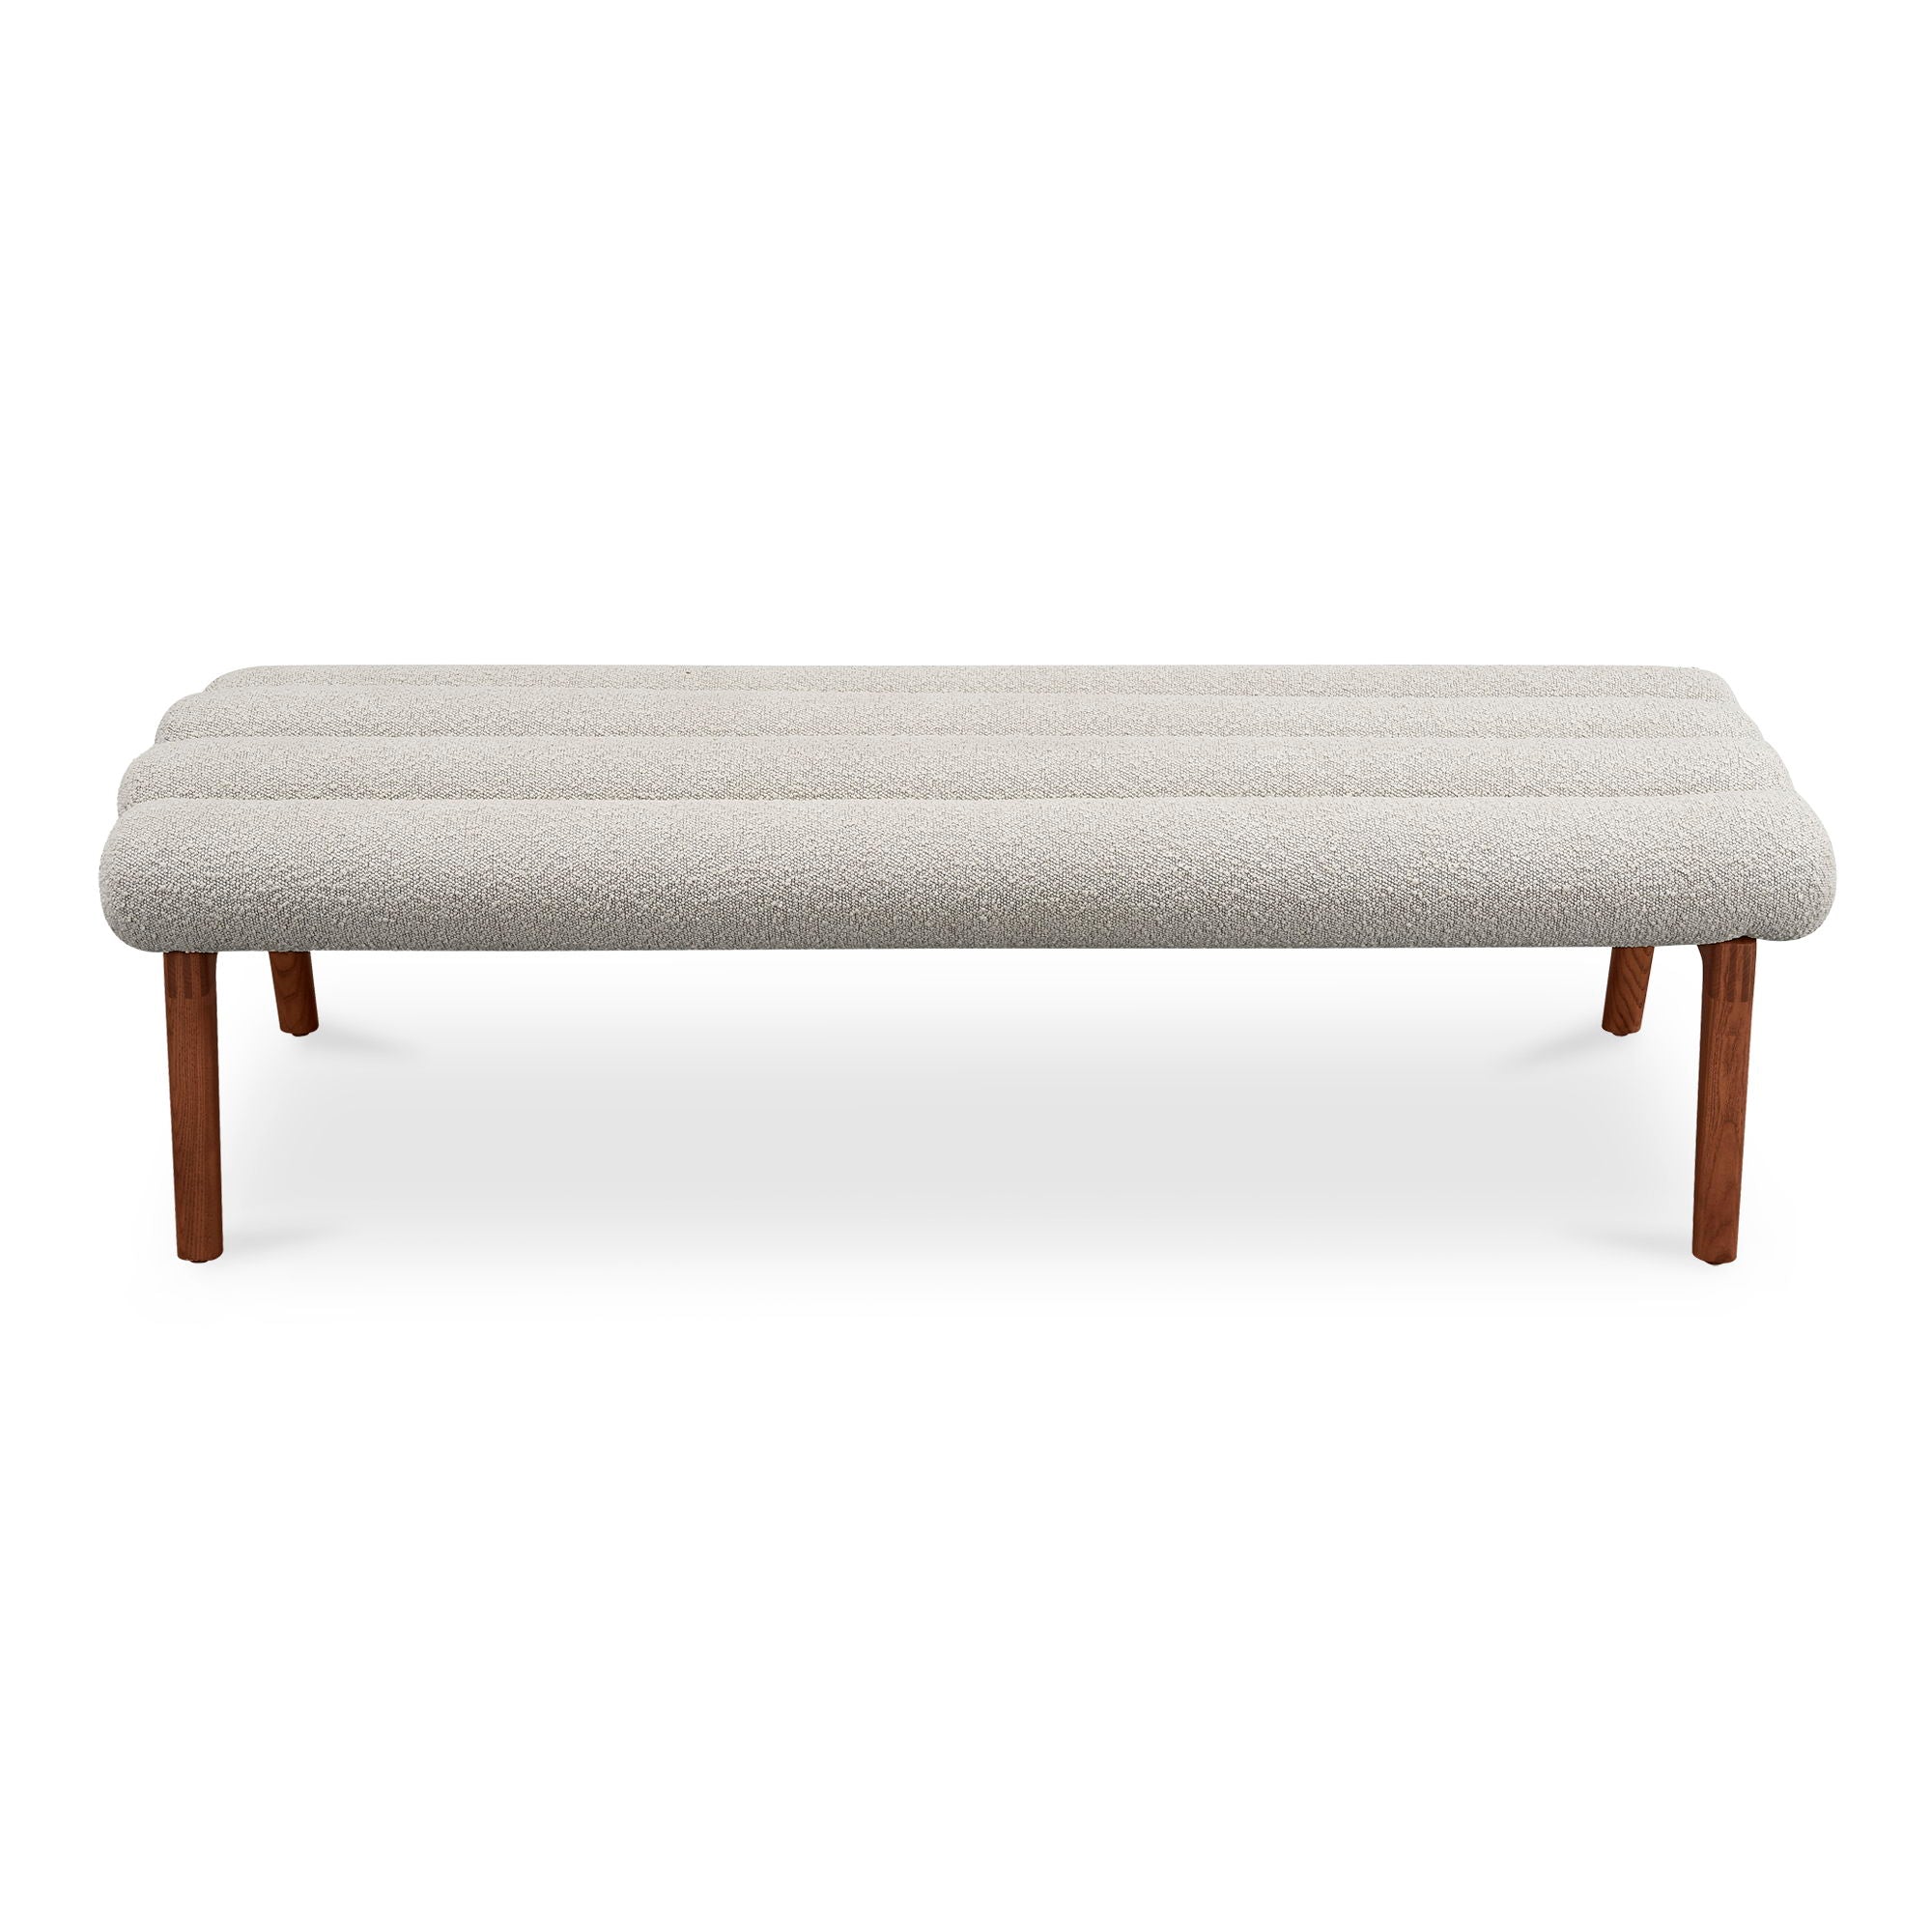 Arlo - Bench Performance Fabric - Off White